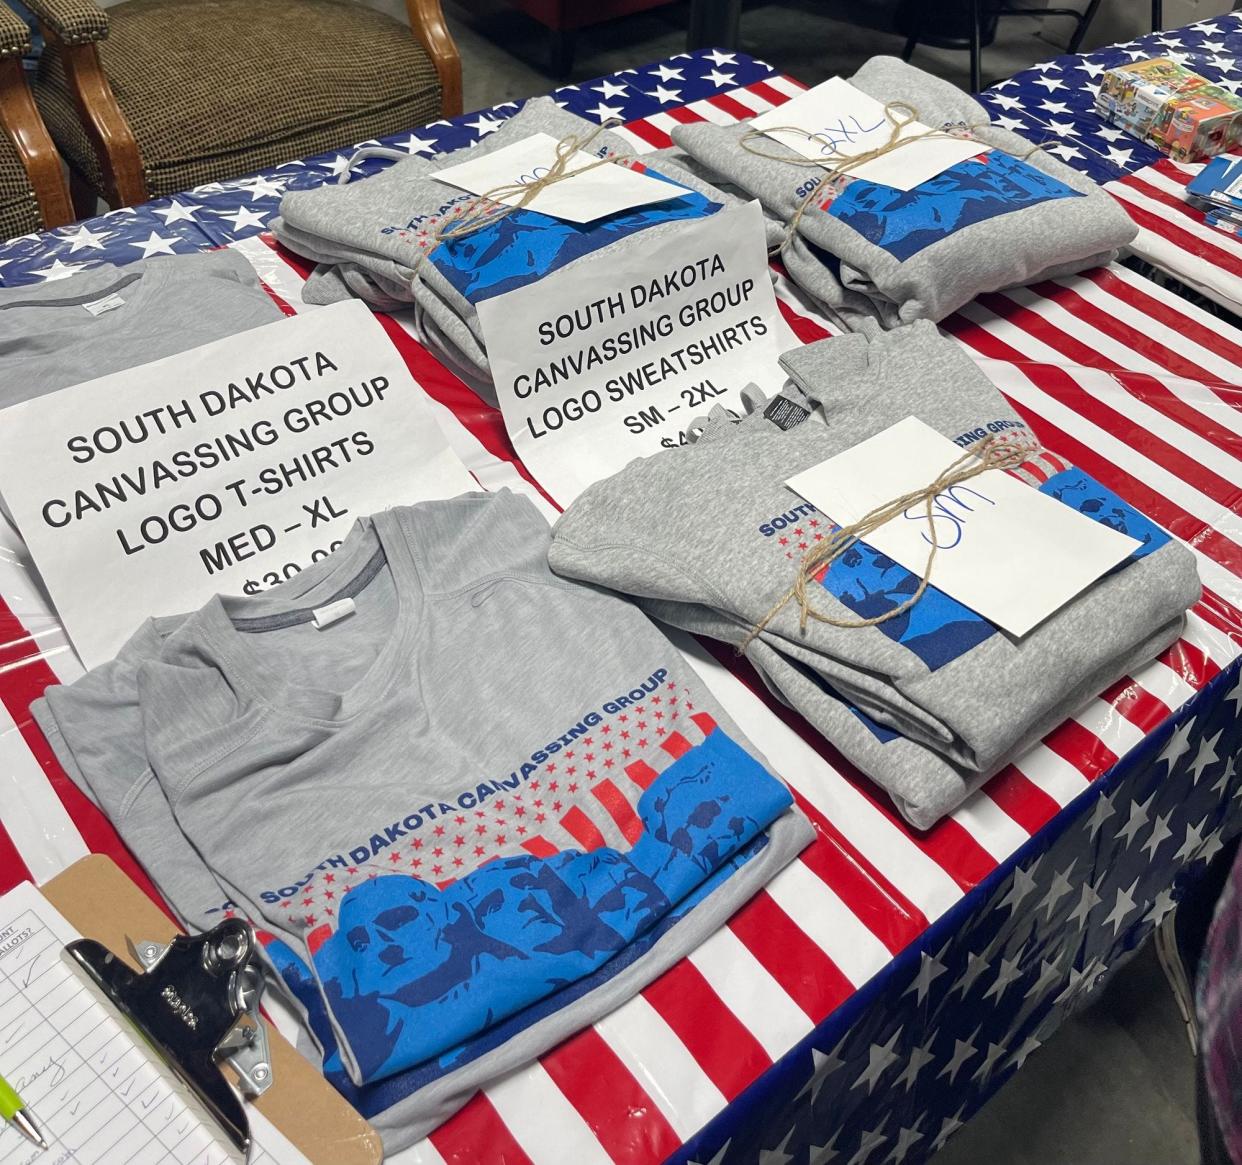 T-shirts for sale at a South Dakota Canvassing event at the Military Heritage Alliance in Sioux Falls, S.D., on Oct. 19, 2023. The group was formed after MyPillow founder Mike Lindell held his Cyber Symposium in Sioux Falls in August 2021.